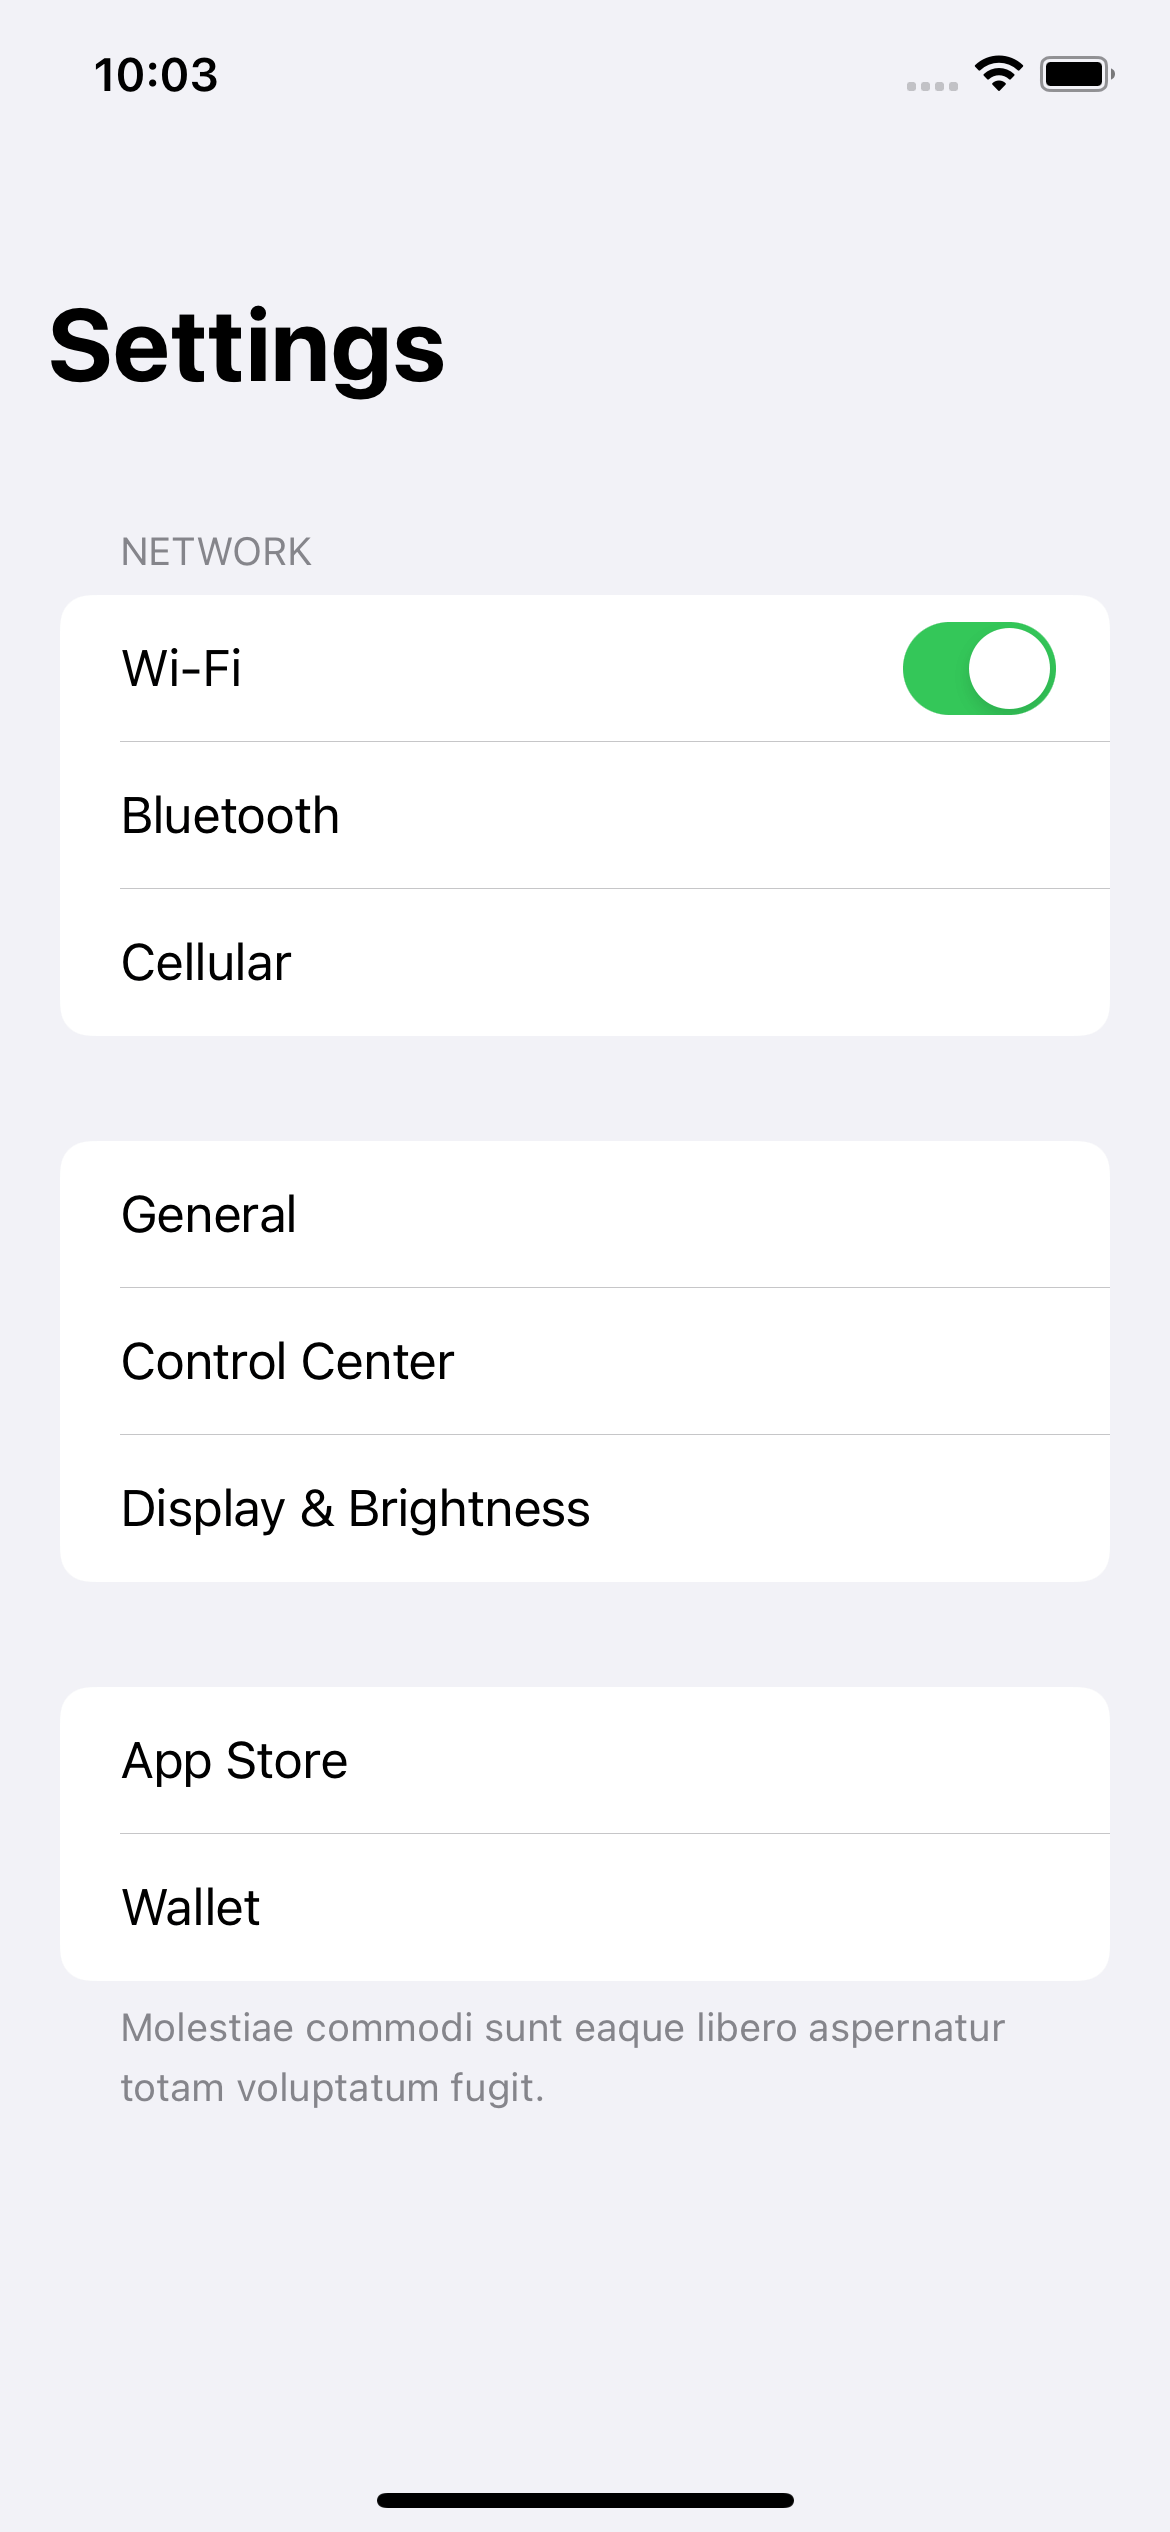 A replicate of the Settings app built with a static list.